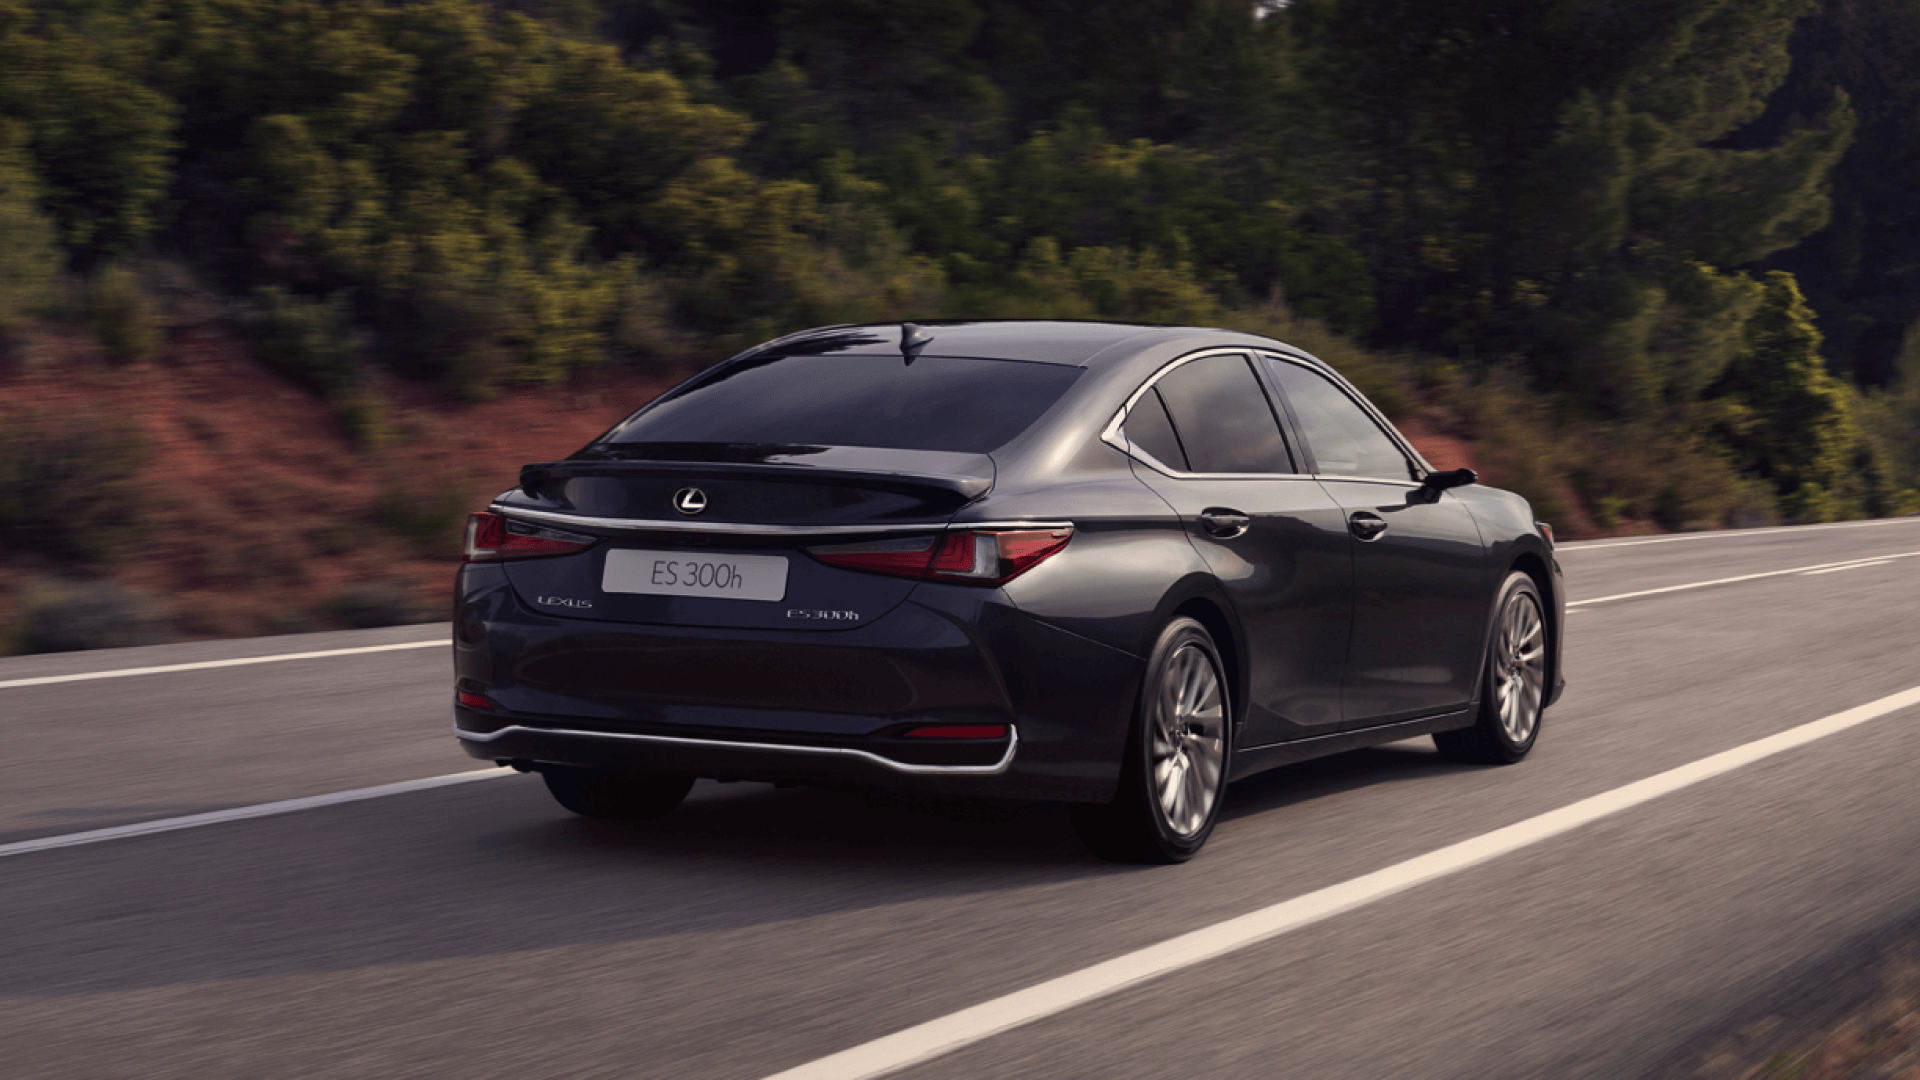 Rear view of a Lexus ES driving on a road